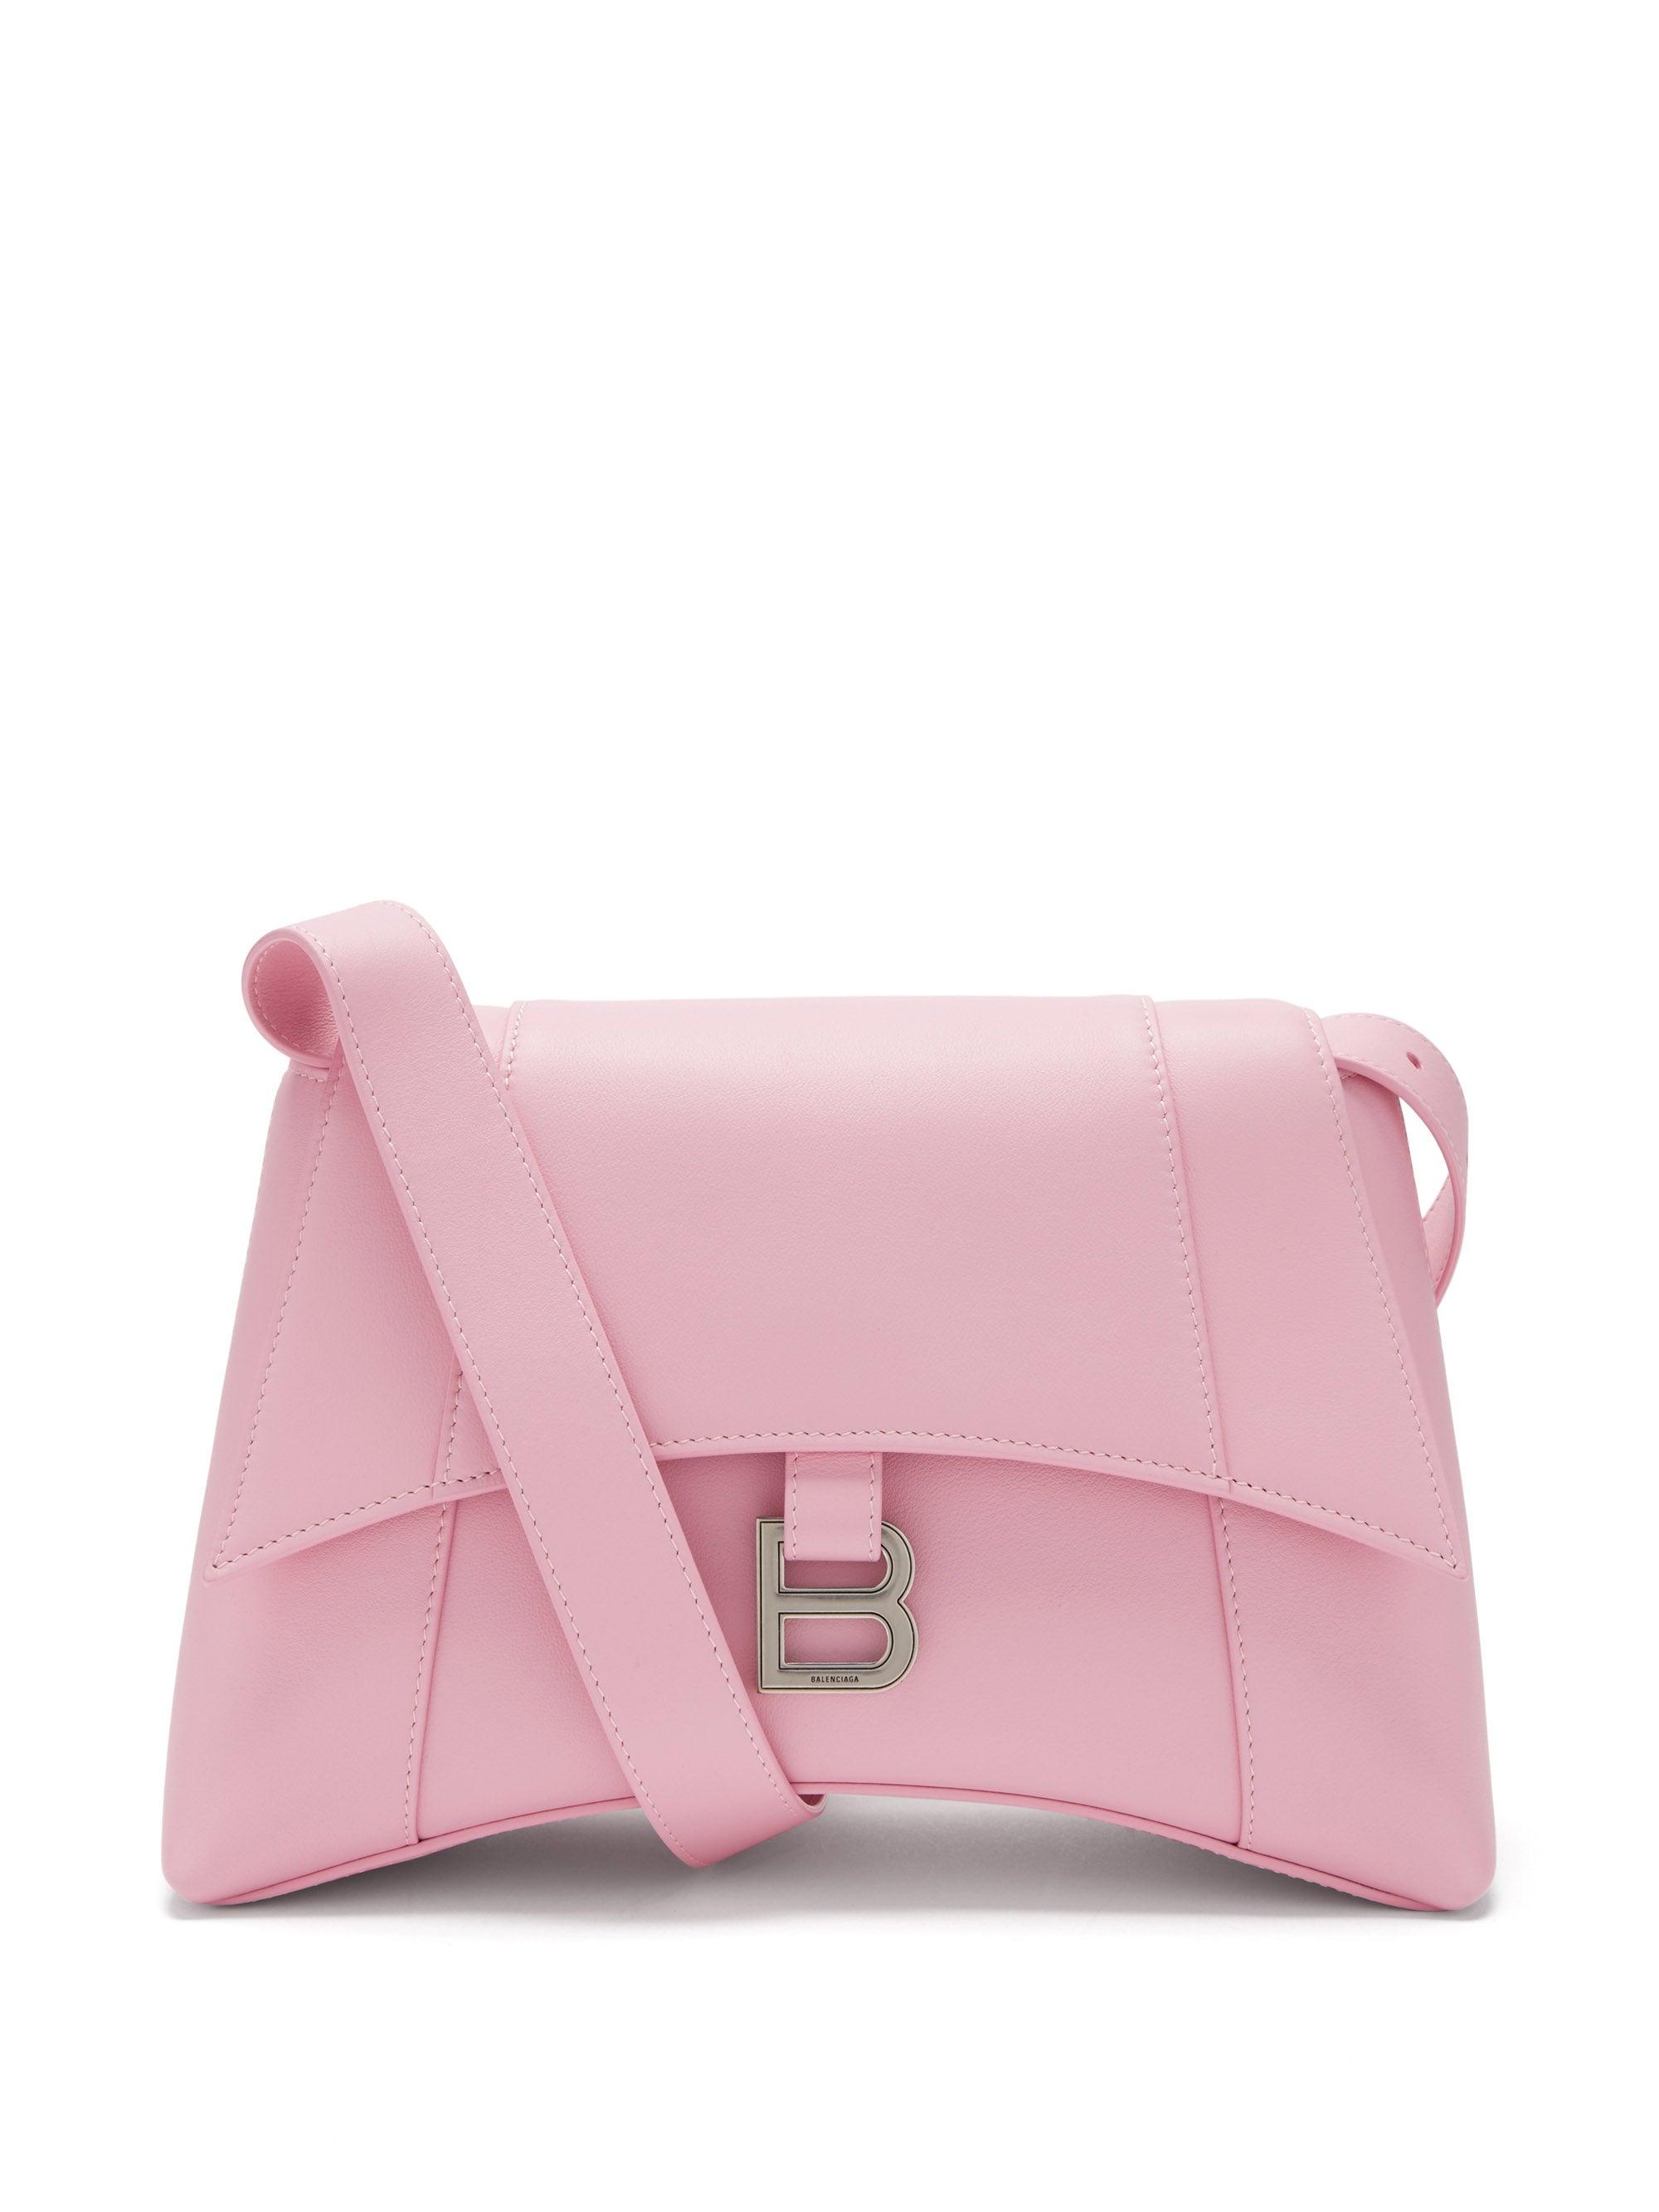 Balenciaga Downtown S Leather Cross-body Bag in Pink | Lyst